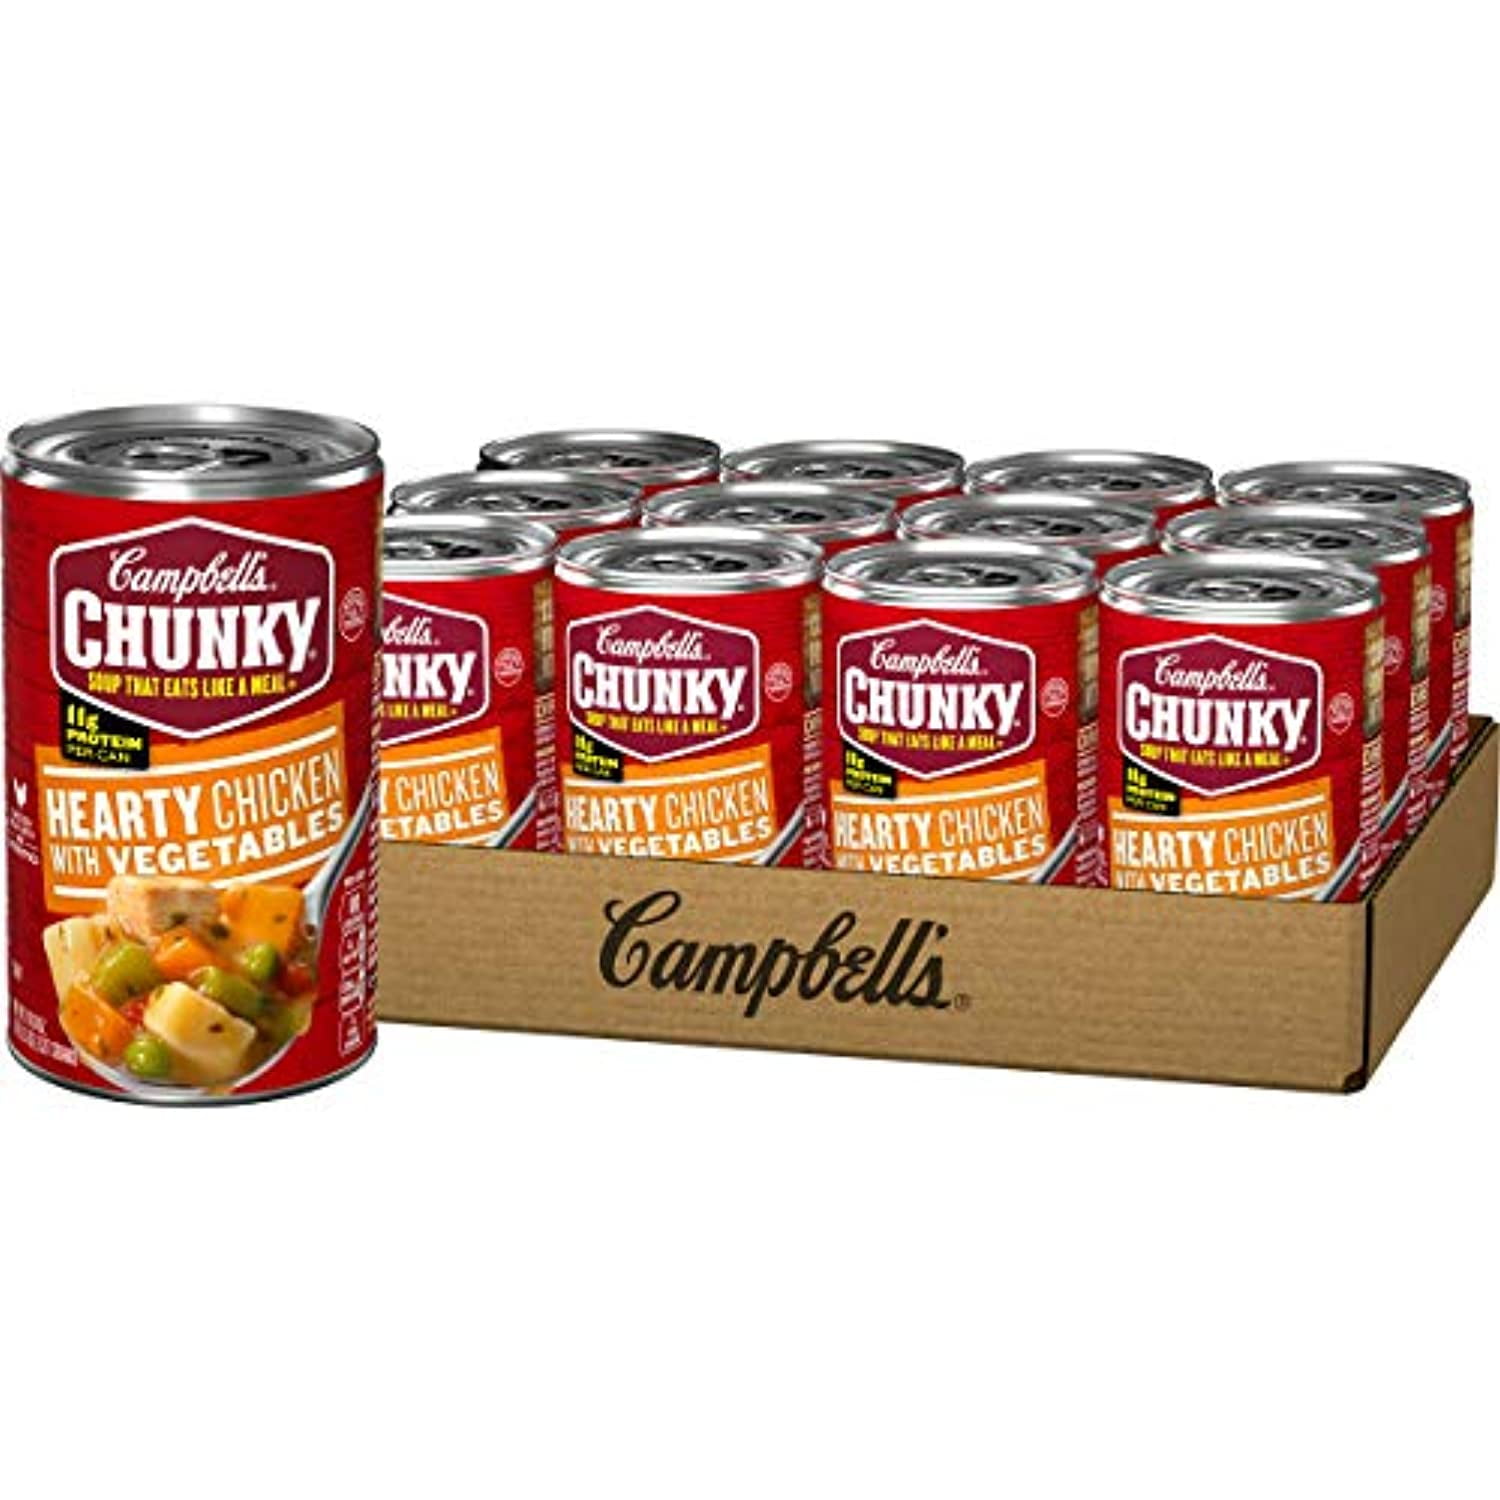 ) Discounted canned goods specials